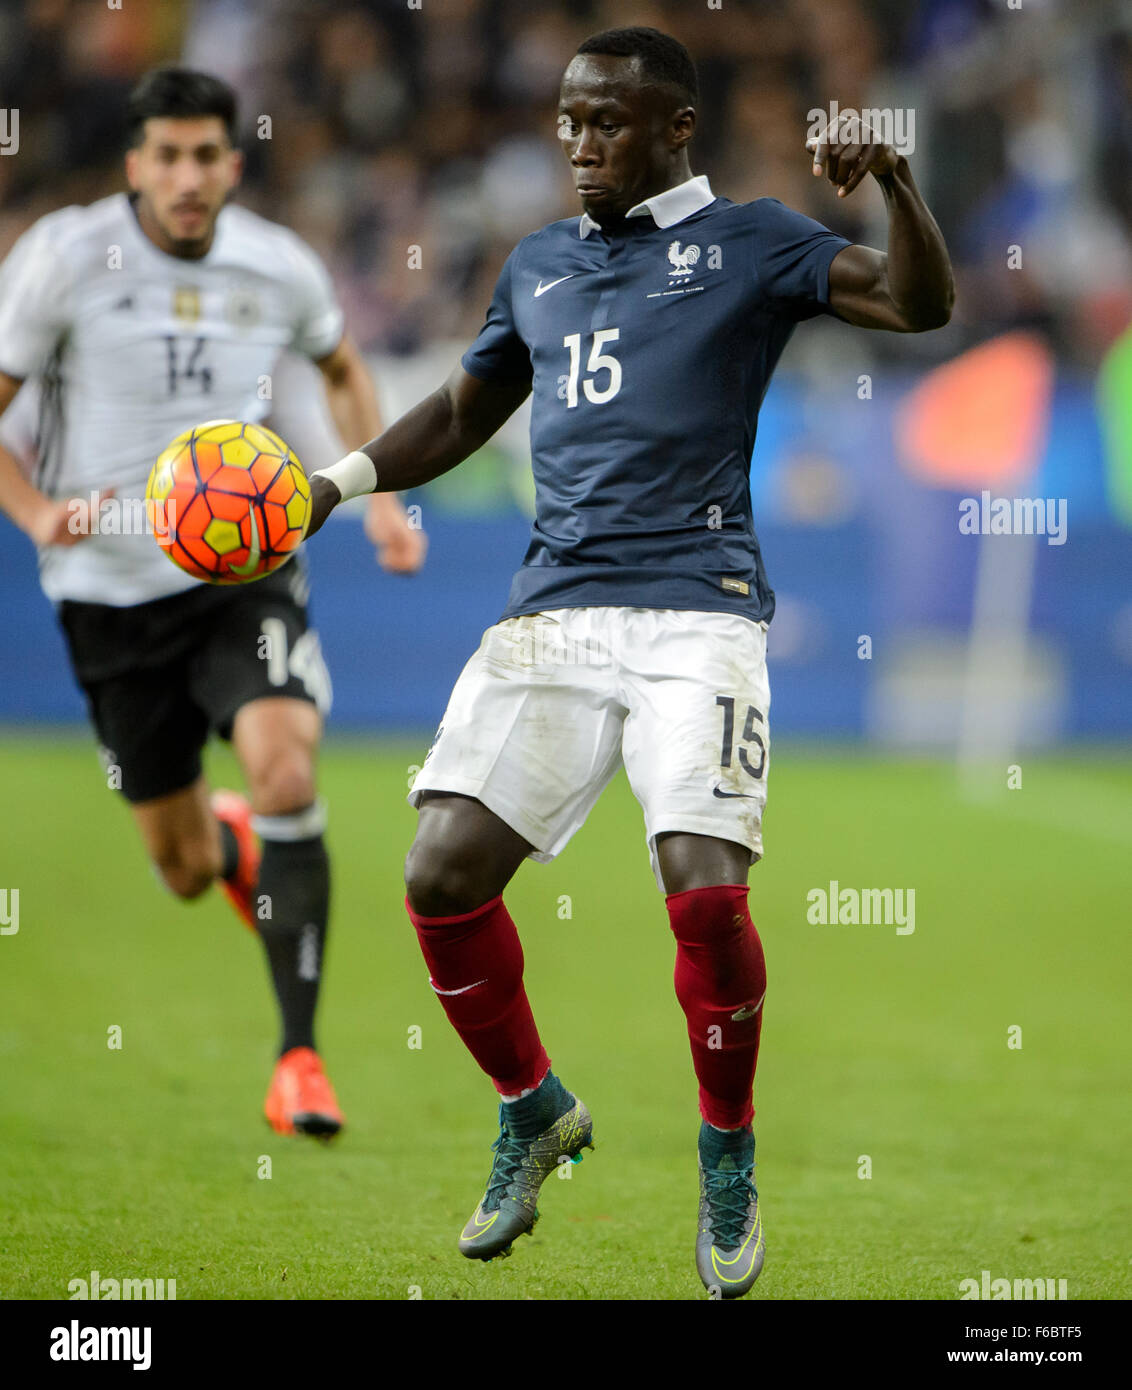 Paris, France. 13th Nov, 2015. France's Bacary Sagna in action during the international soccer friendly France vs Germany in Paris, France, 13 November 2015. Photo: Thomas Eisenhuth/dpa - NO WIRE SERVICE -/dpa/Alamy Live News Stock Photo